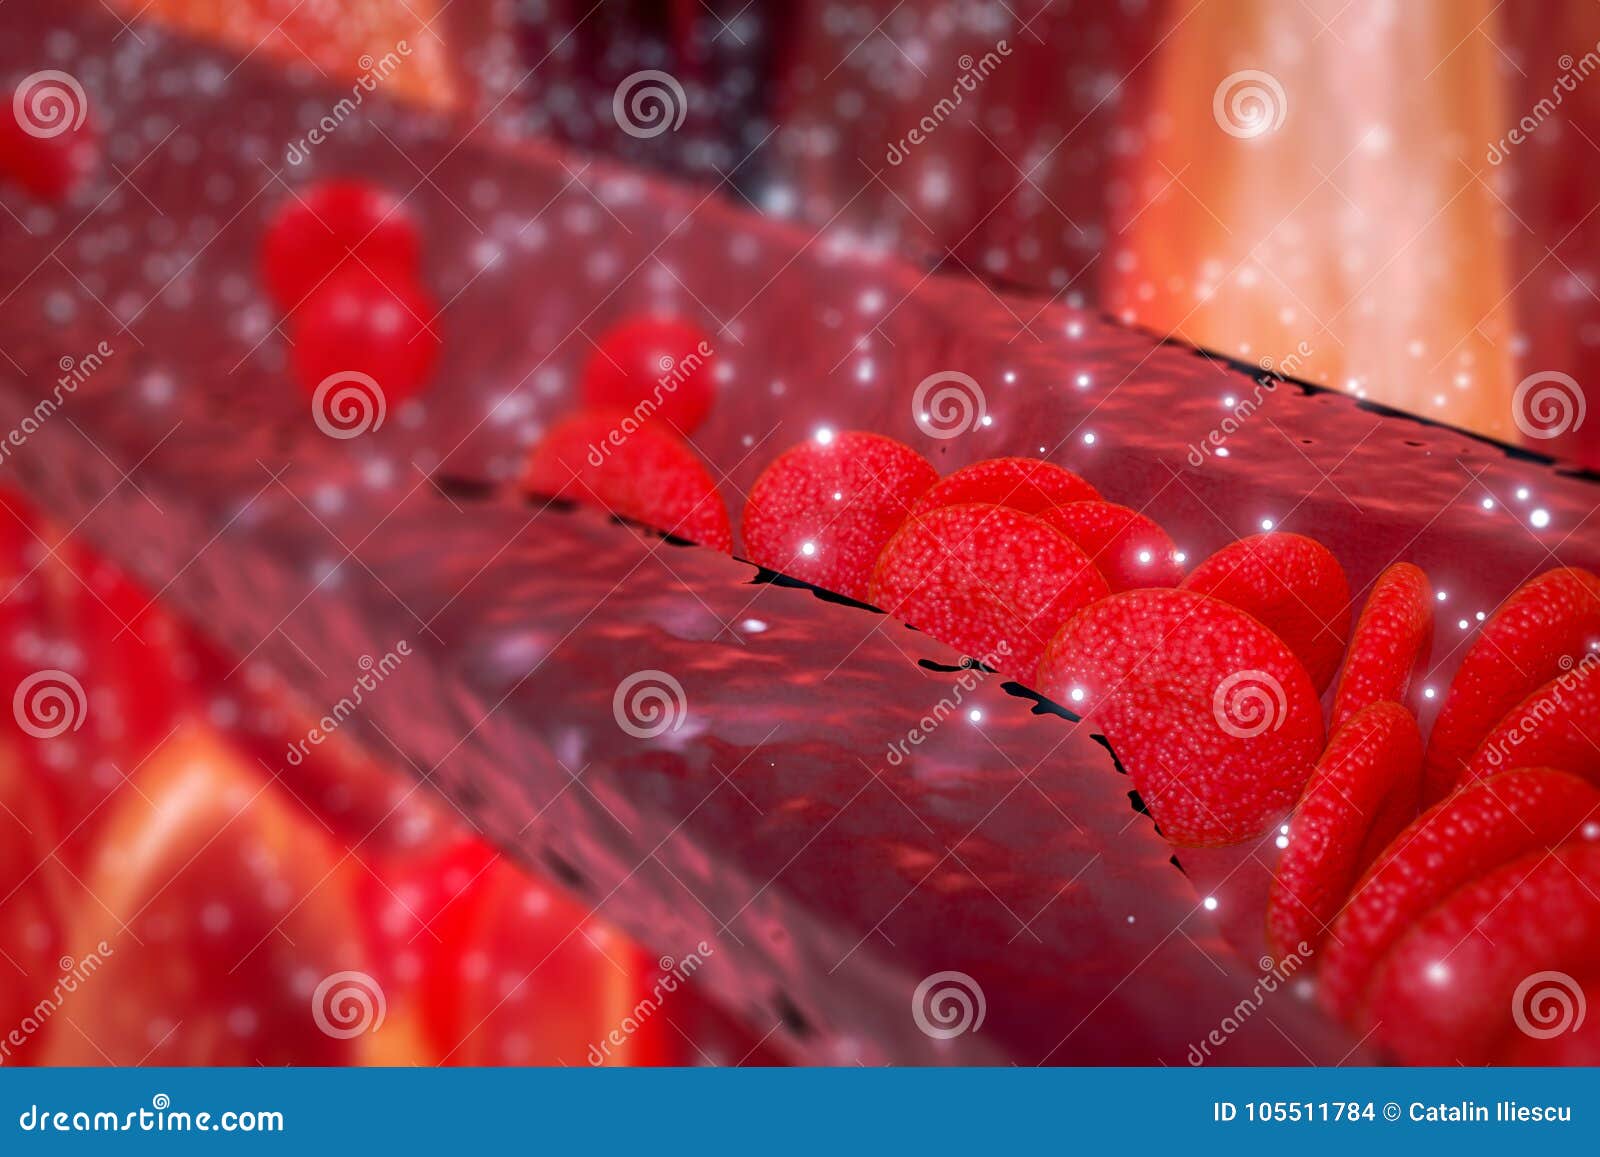 cholesterol plaque in artery, blood vessel with flowing blood cells